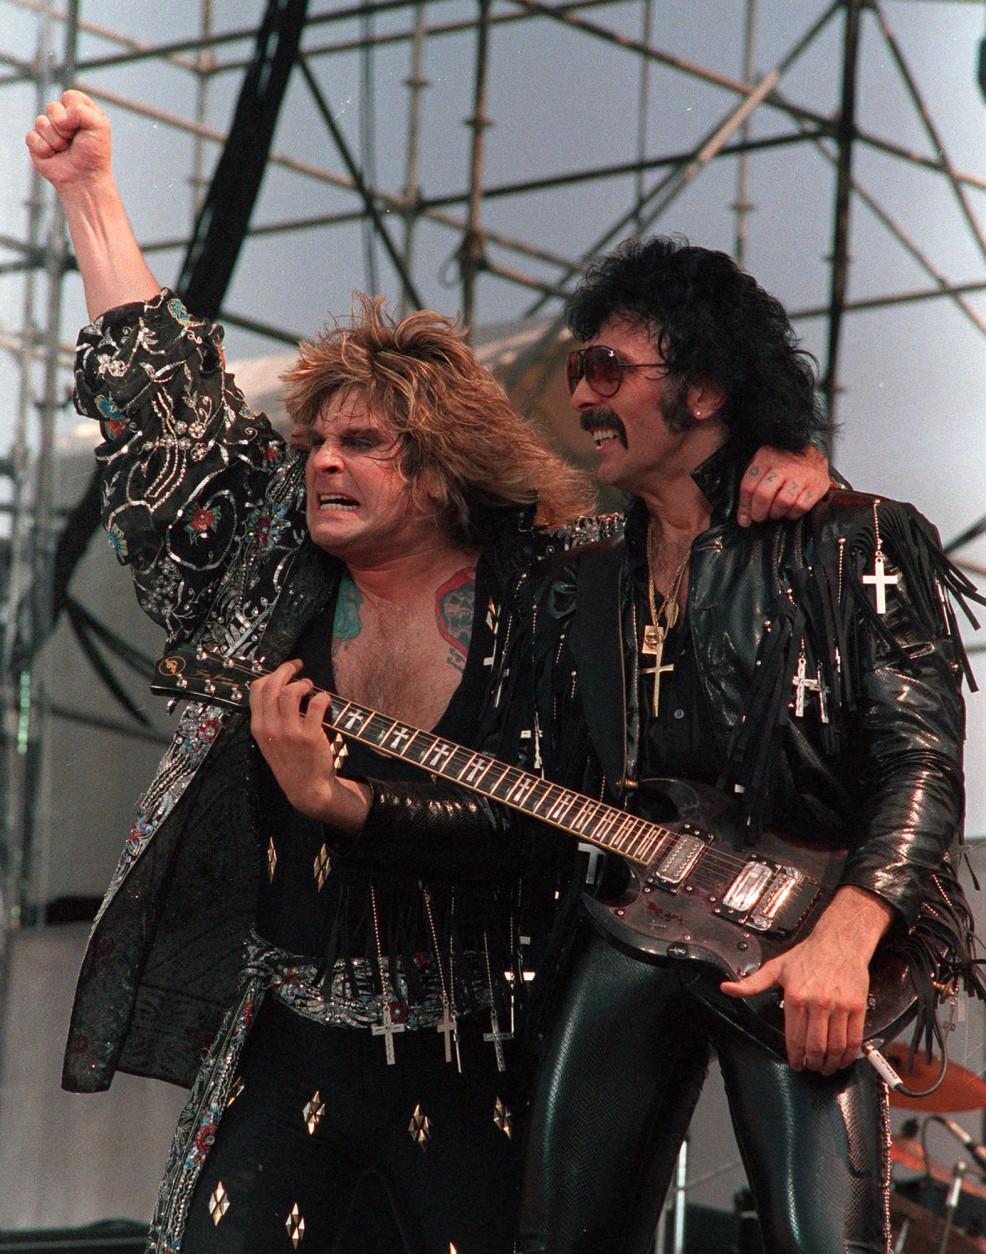 Ozzy Osbourne, left, and Tony Iommi of Black Sabbath perform during the Live Aid concert in Philadelphia, Pa., July 13, 1985.  (AP Photo/Rusty Kennedy)